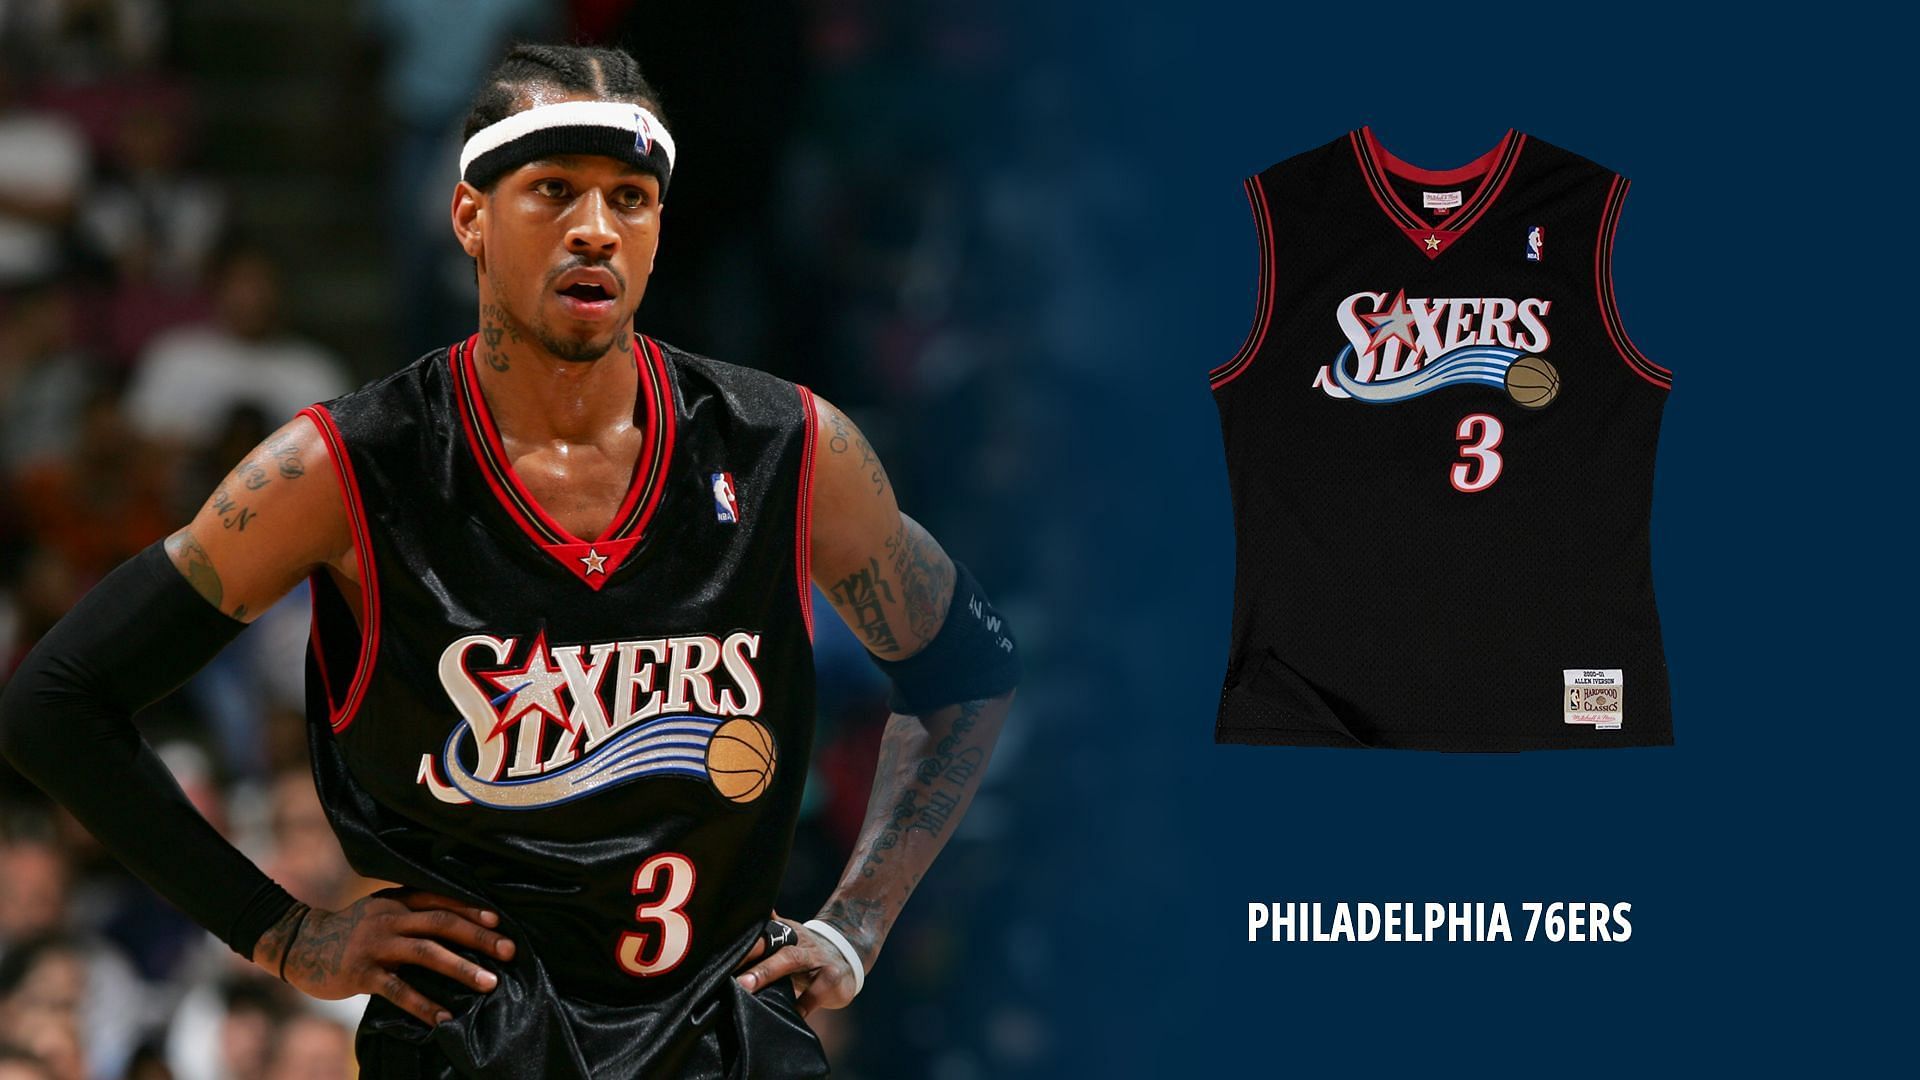 Allen Iverson wore one of the most iconic NBA jerseys of all time